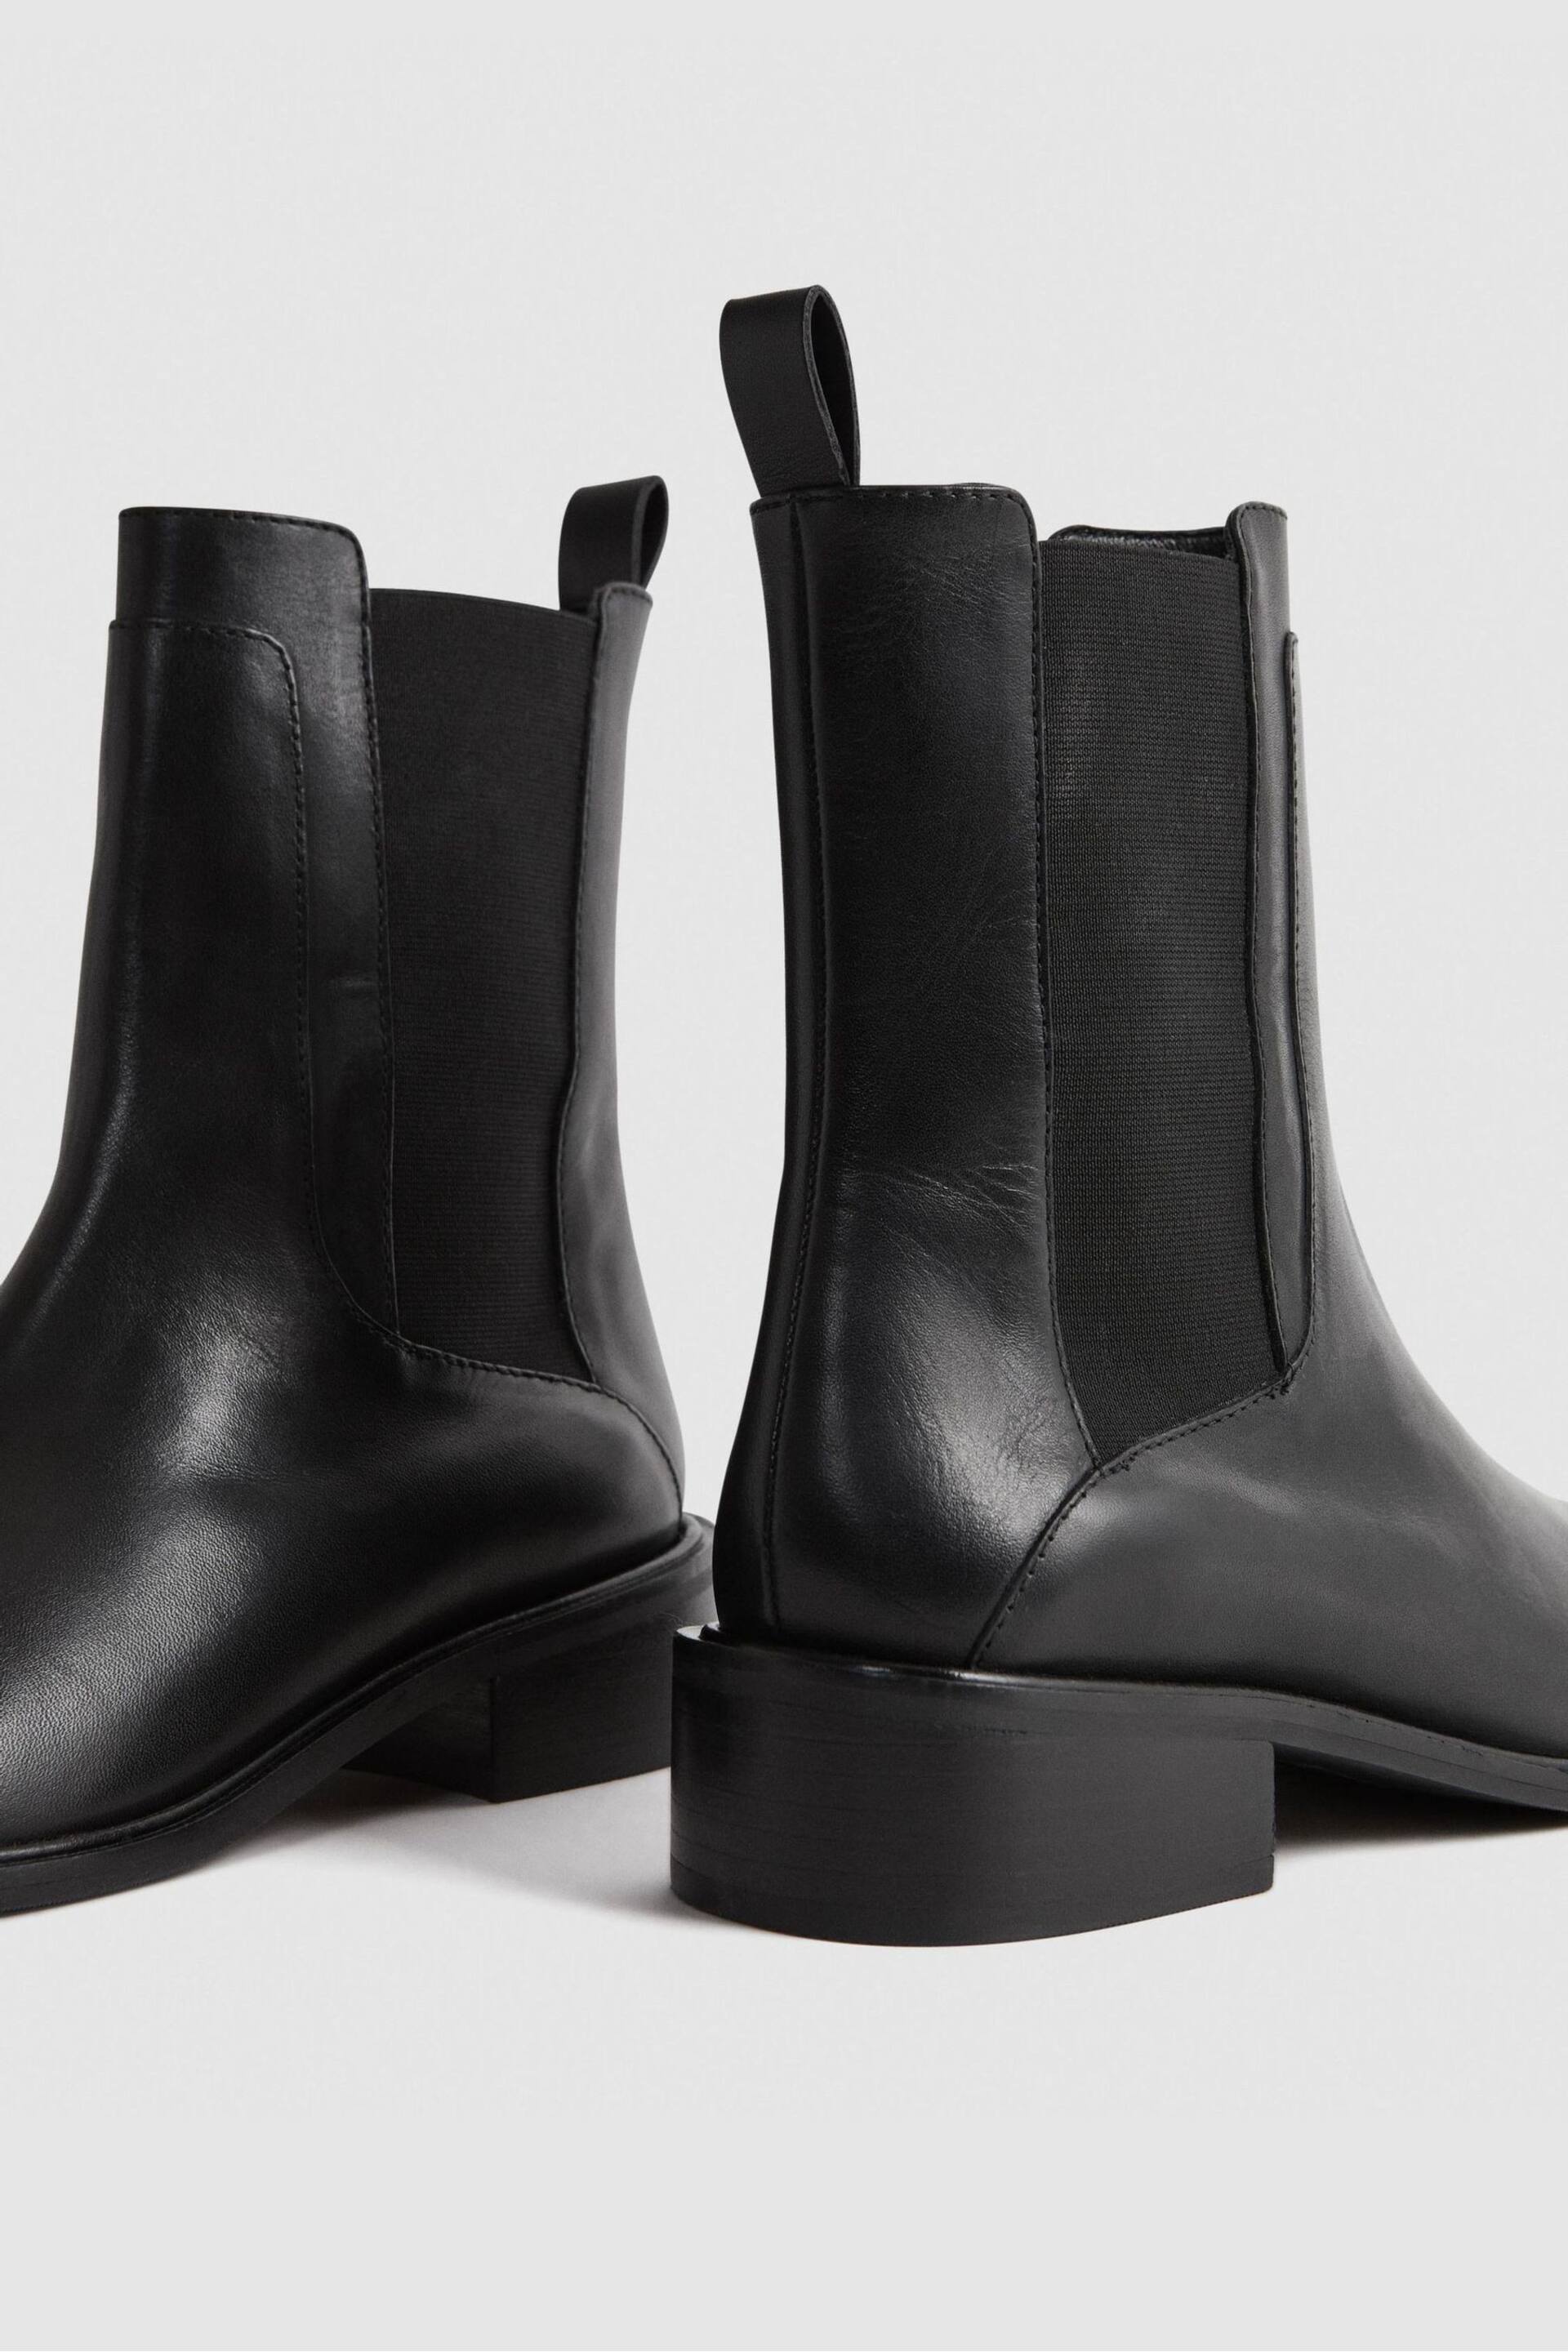 Reiss Black Willow Leather Chelsea Boots - Image 5 of 5